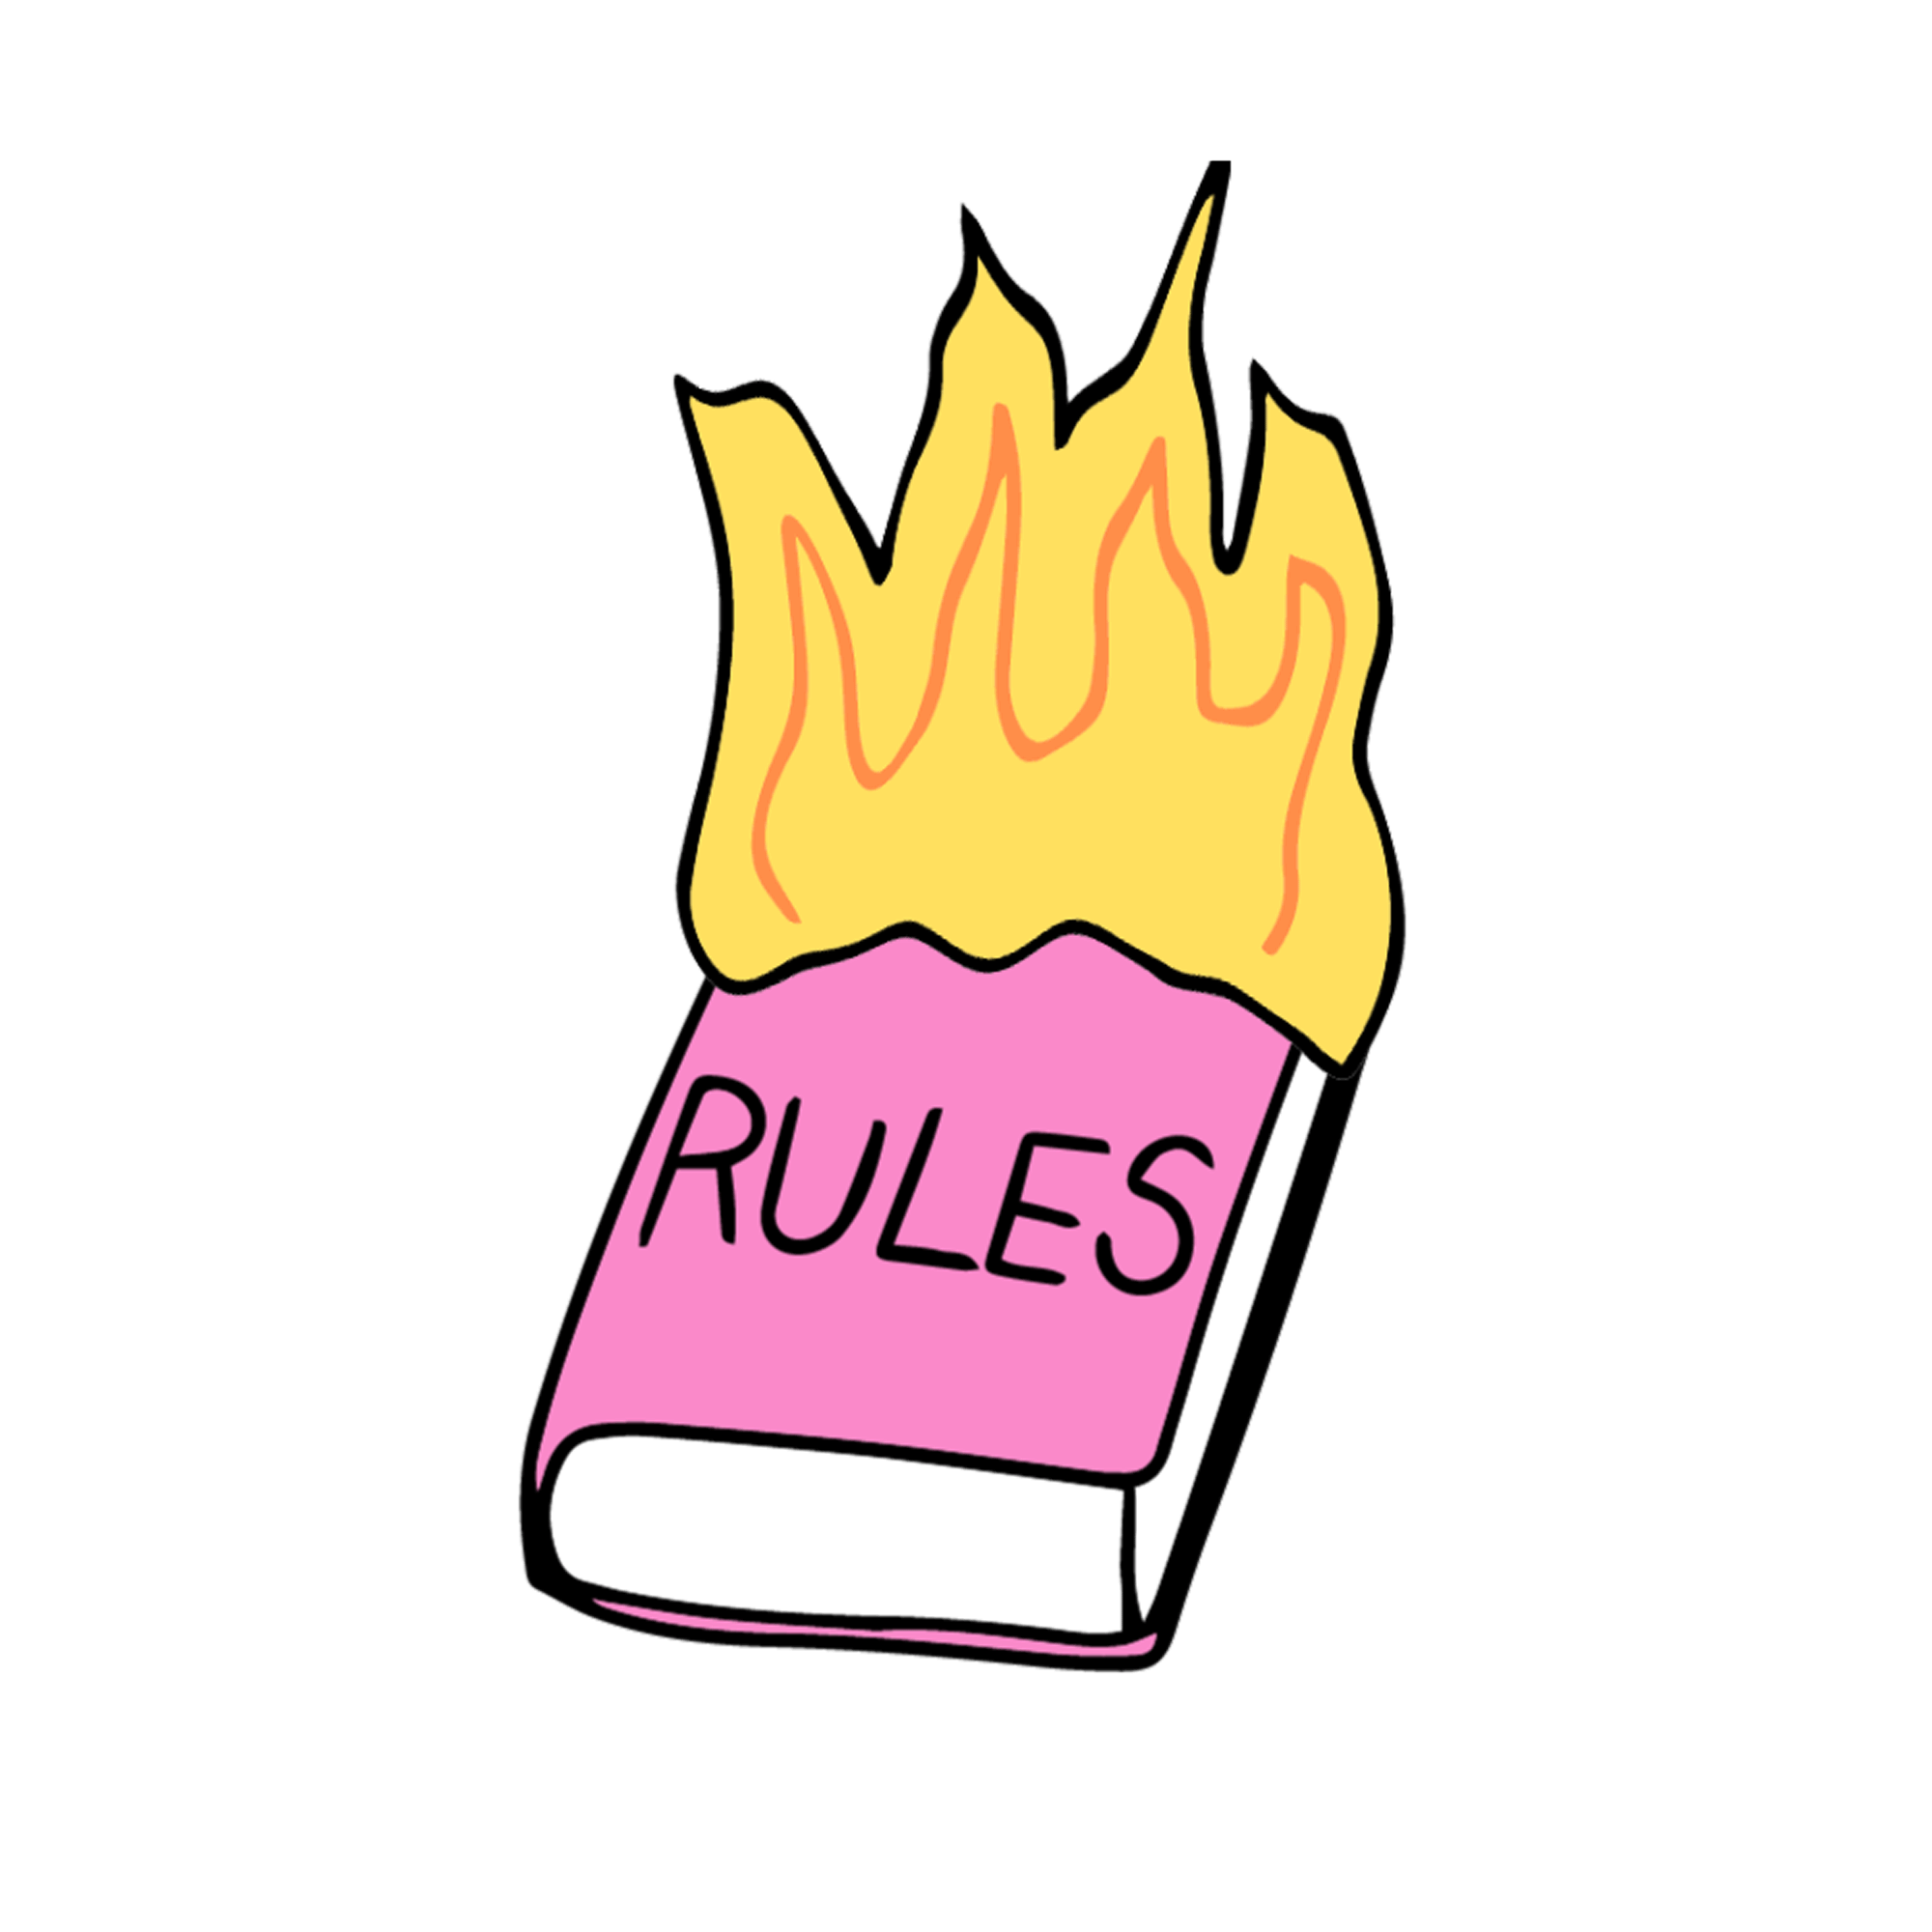 A GIF of a rulebook on fire